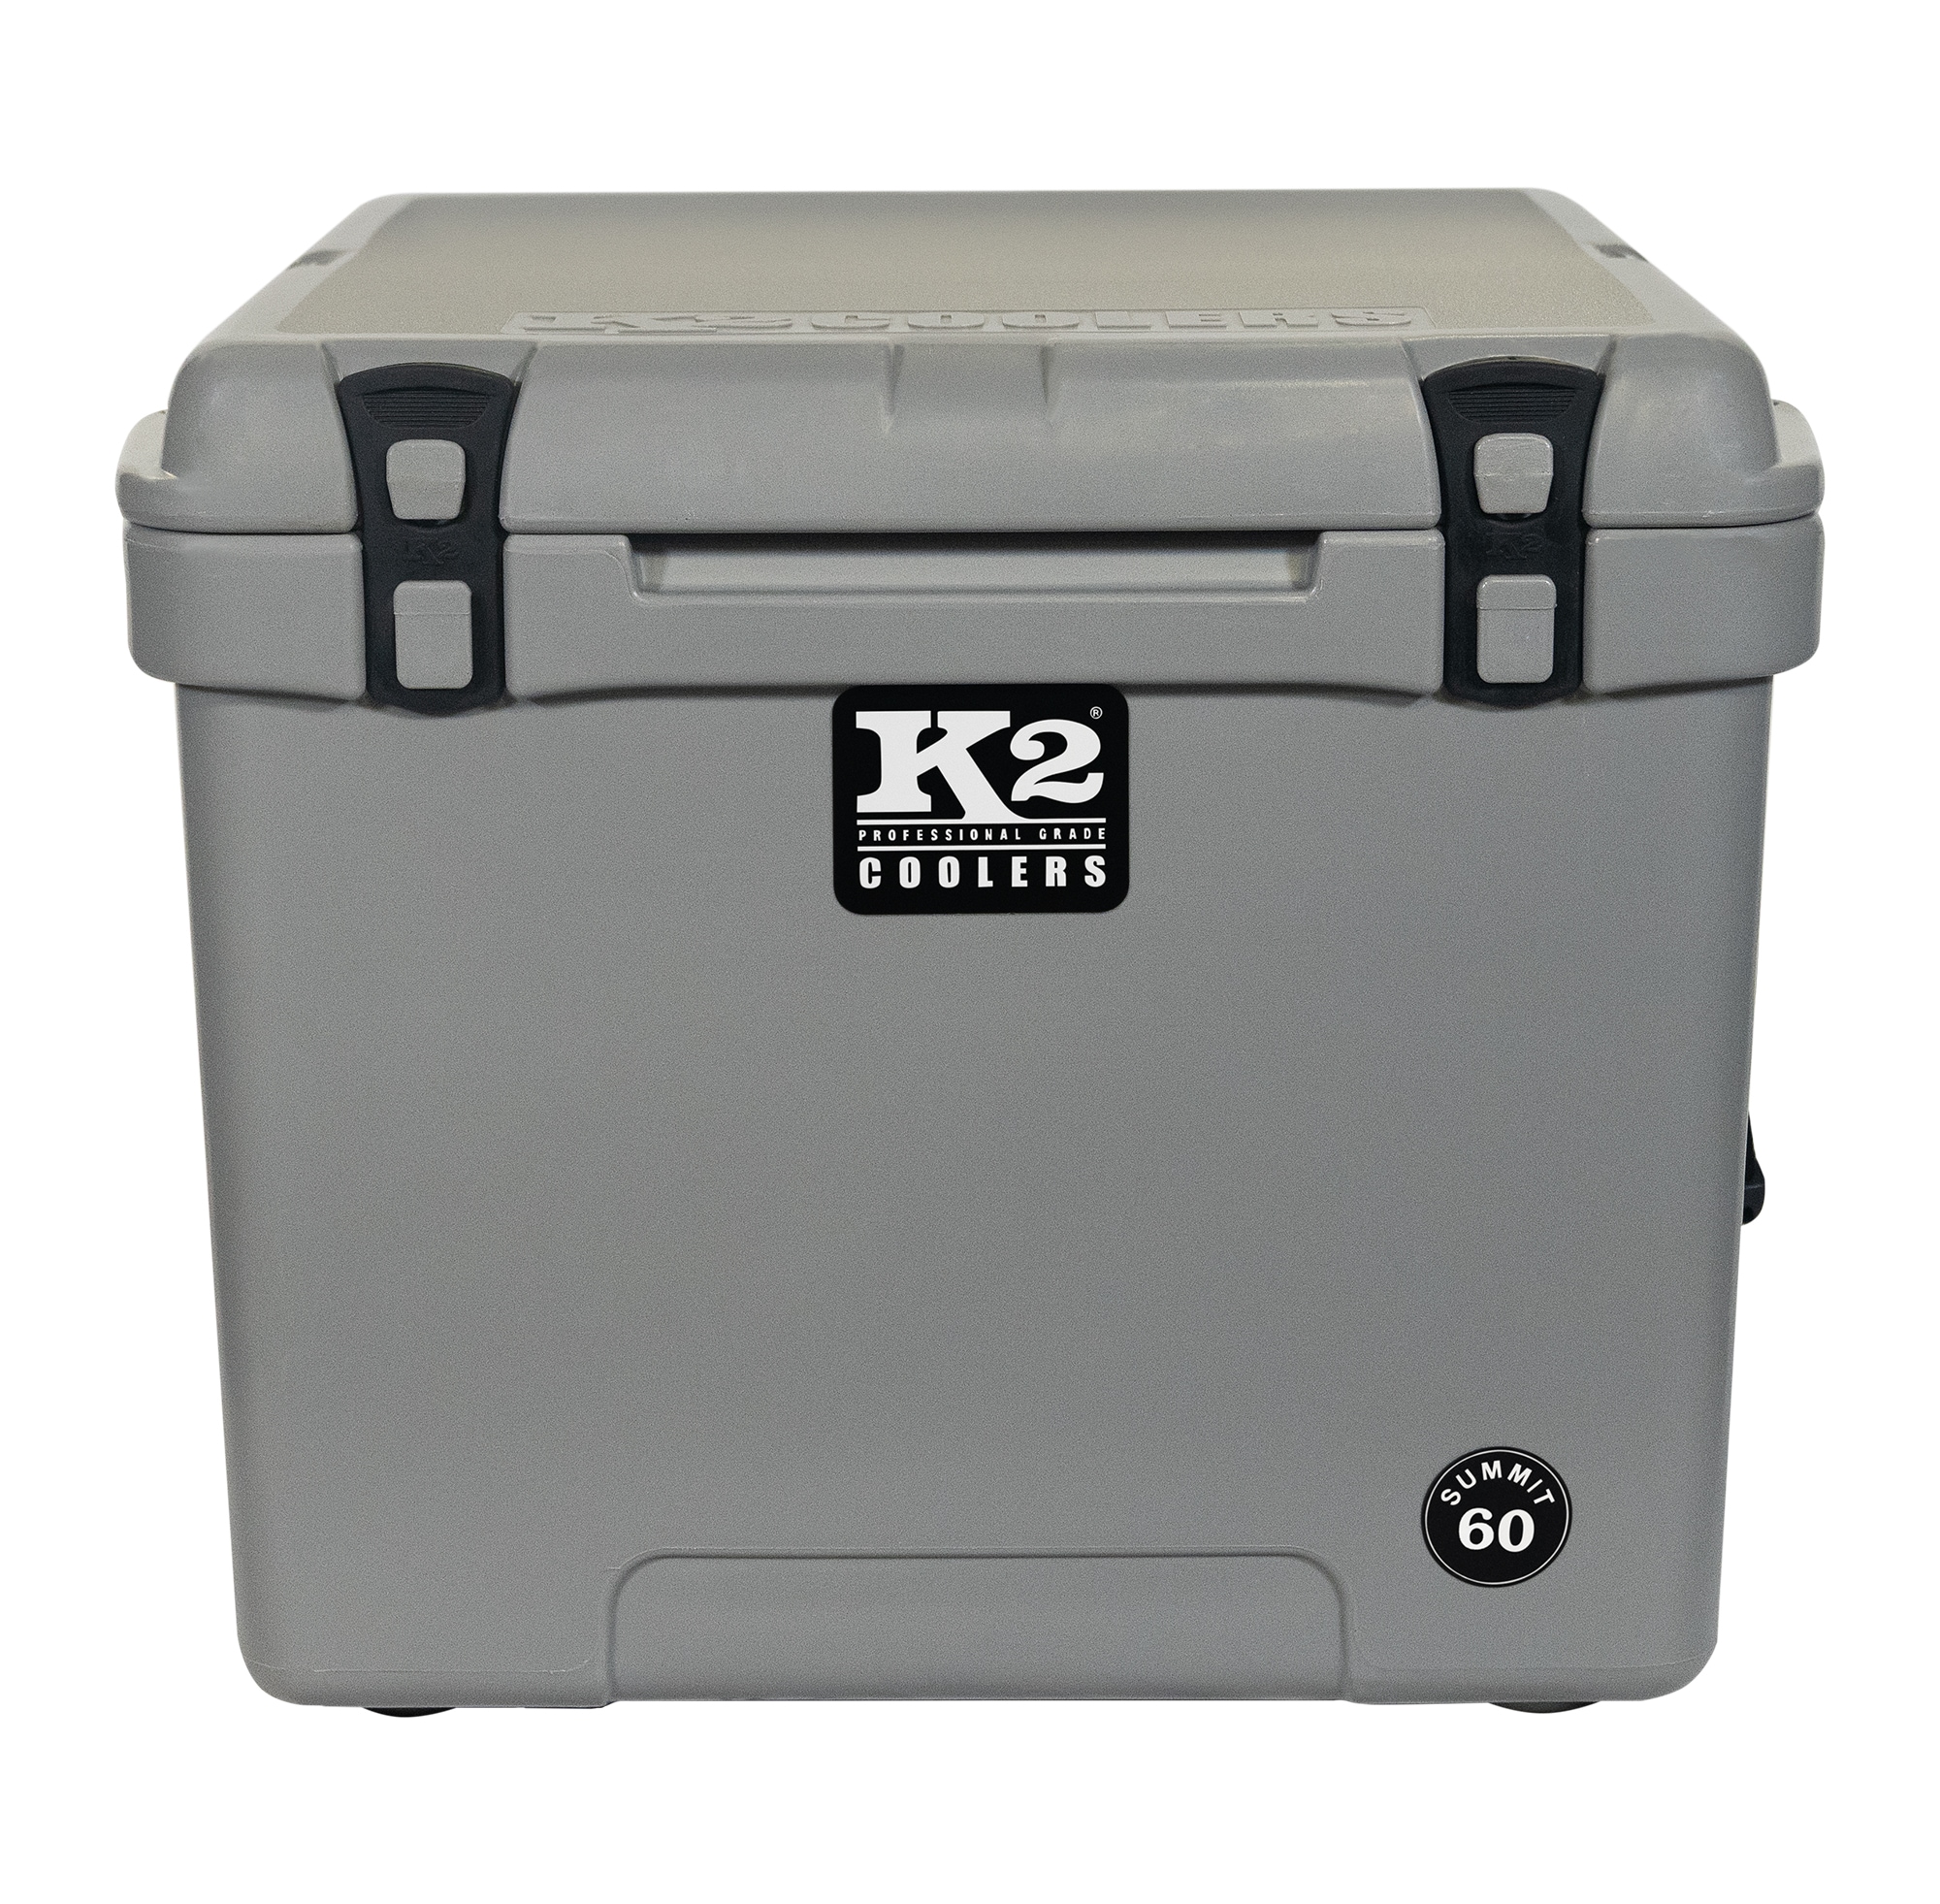 K2 Coolers  Hunting, Camping, Fishing, Tailgating Coolers